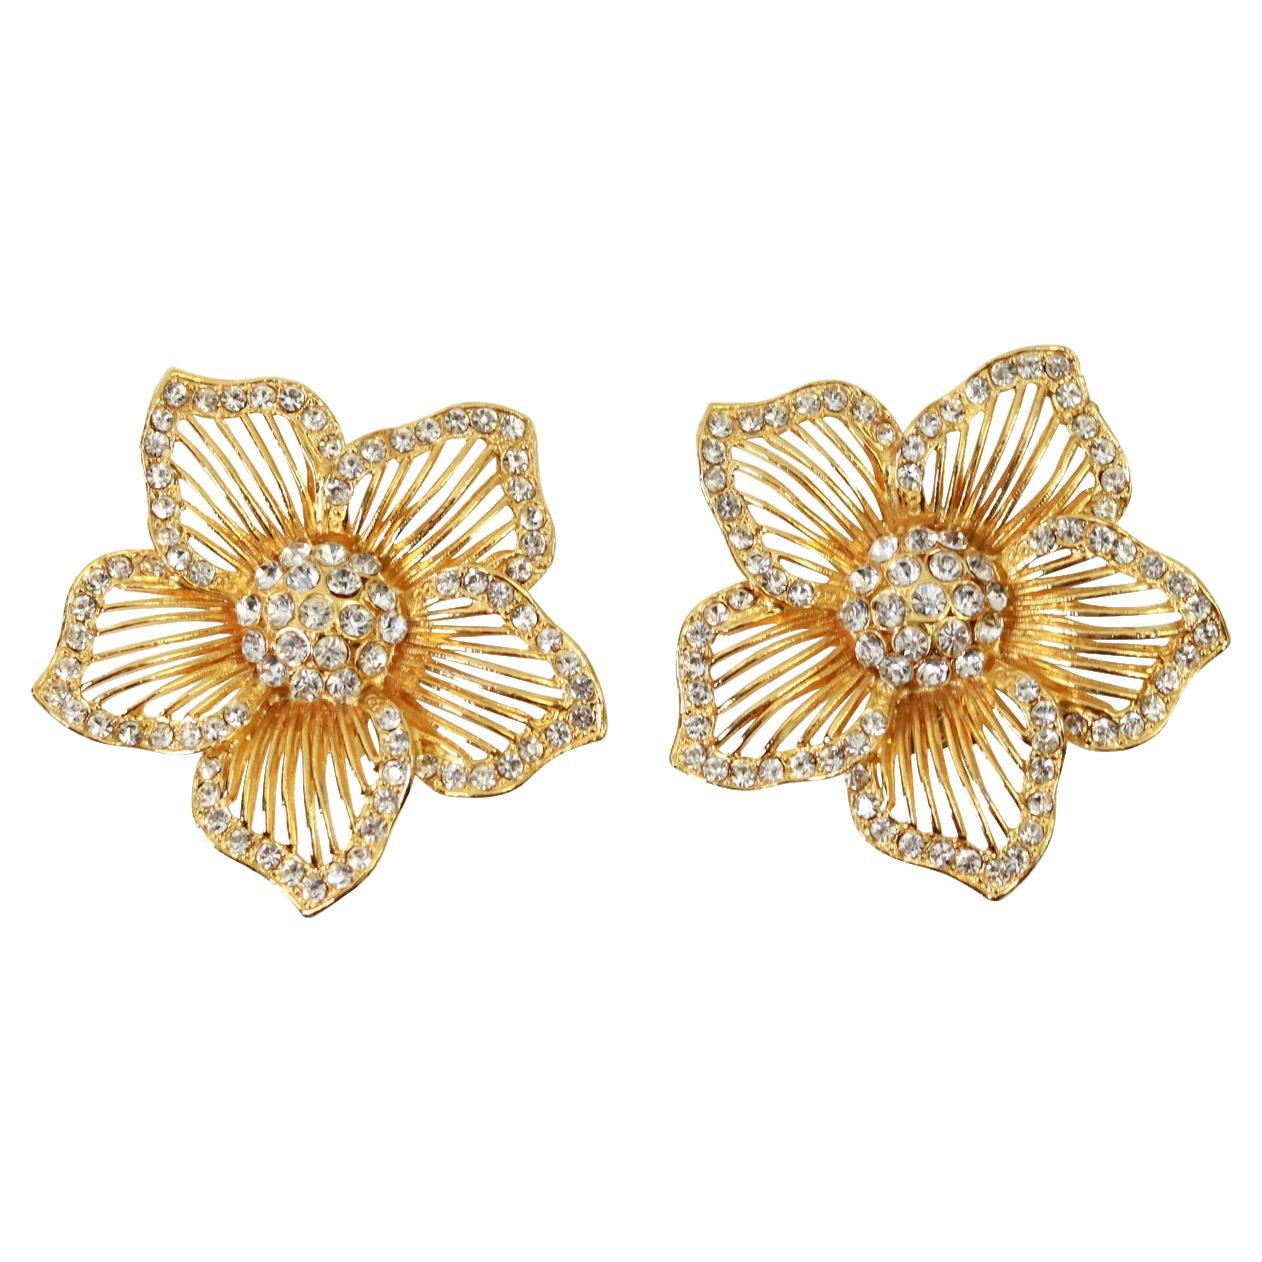 Vintage Gold Tone and Diamante Flower Earrings, Circa 1980's For Sale